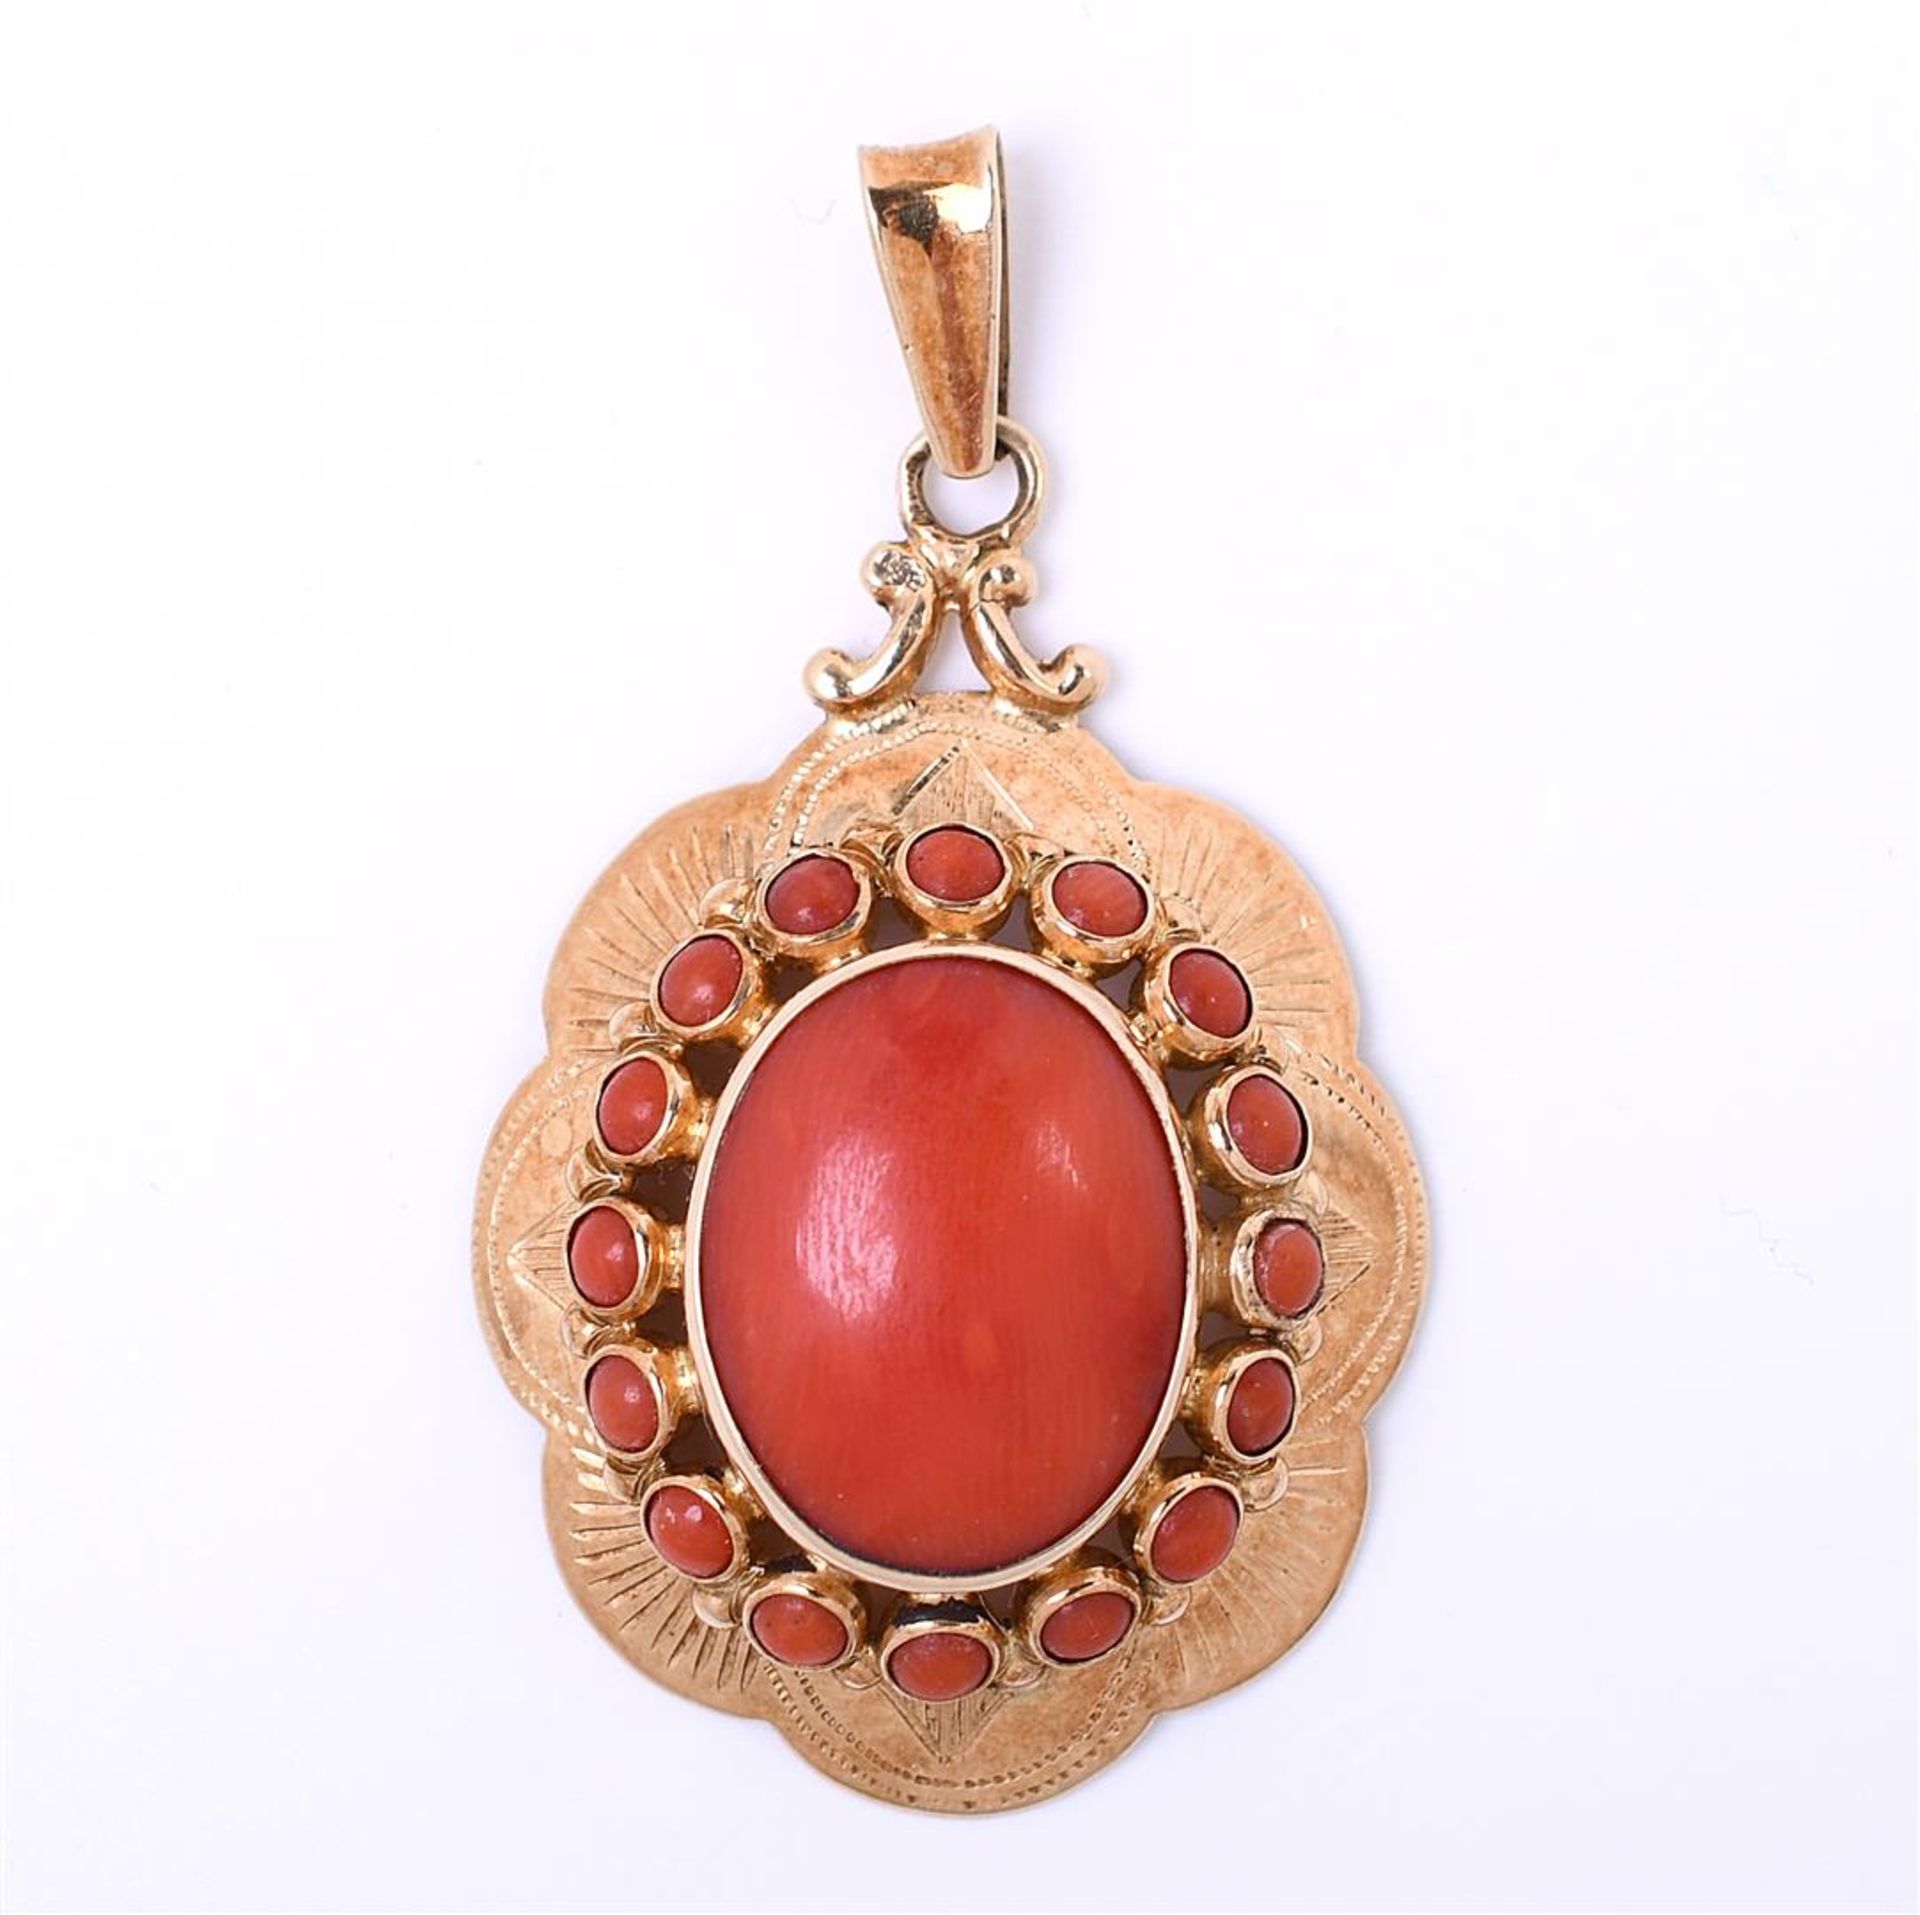 9 carat yellow gold ladies pendant, set in the center with a cabuchon cut red coral